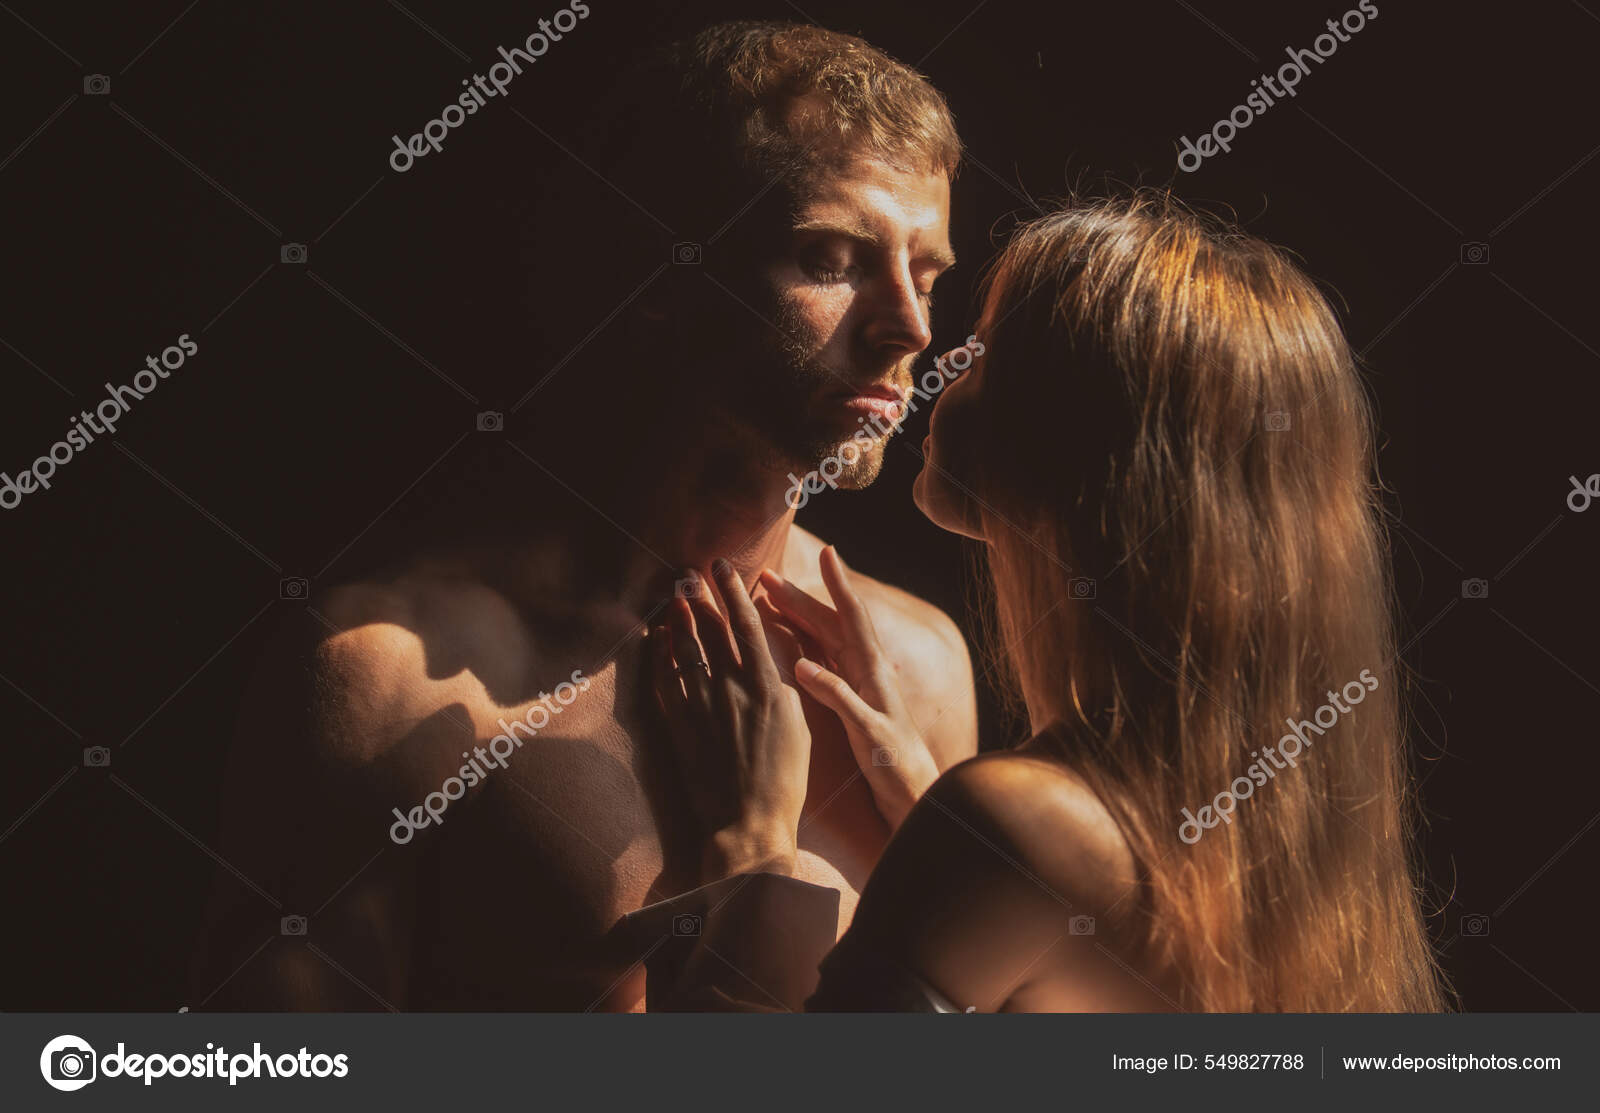 Portrait of lovely couple in love. Young sensual girlfriend glad to passionate kiss from her boyfriend. Handsome man embraces his woman and kisses picture